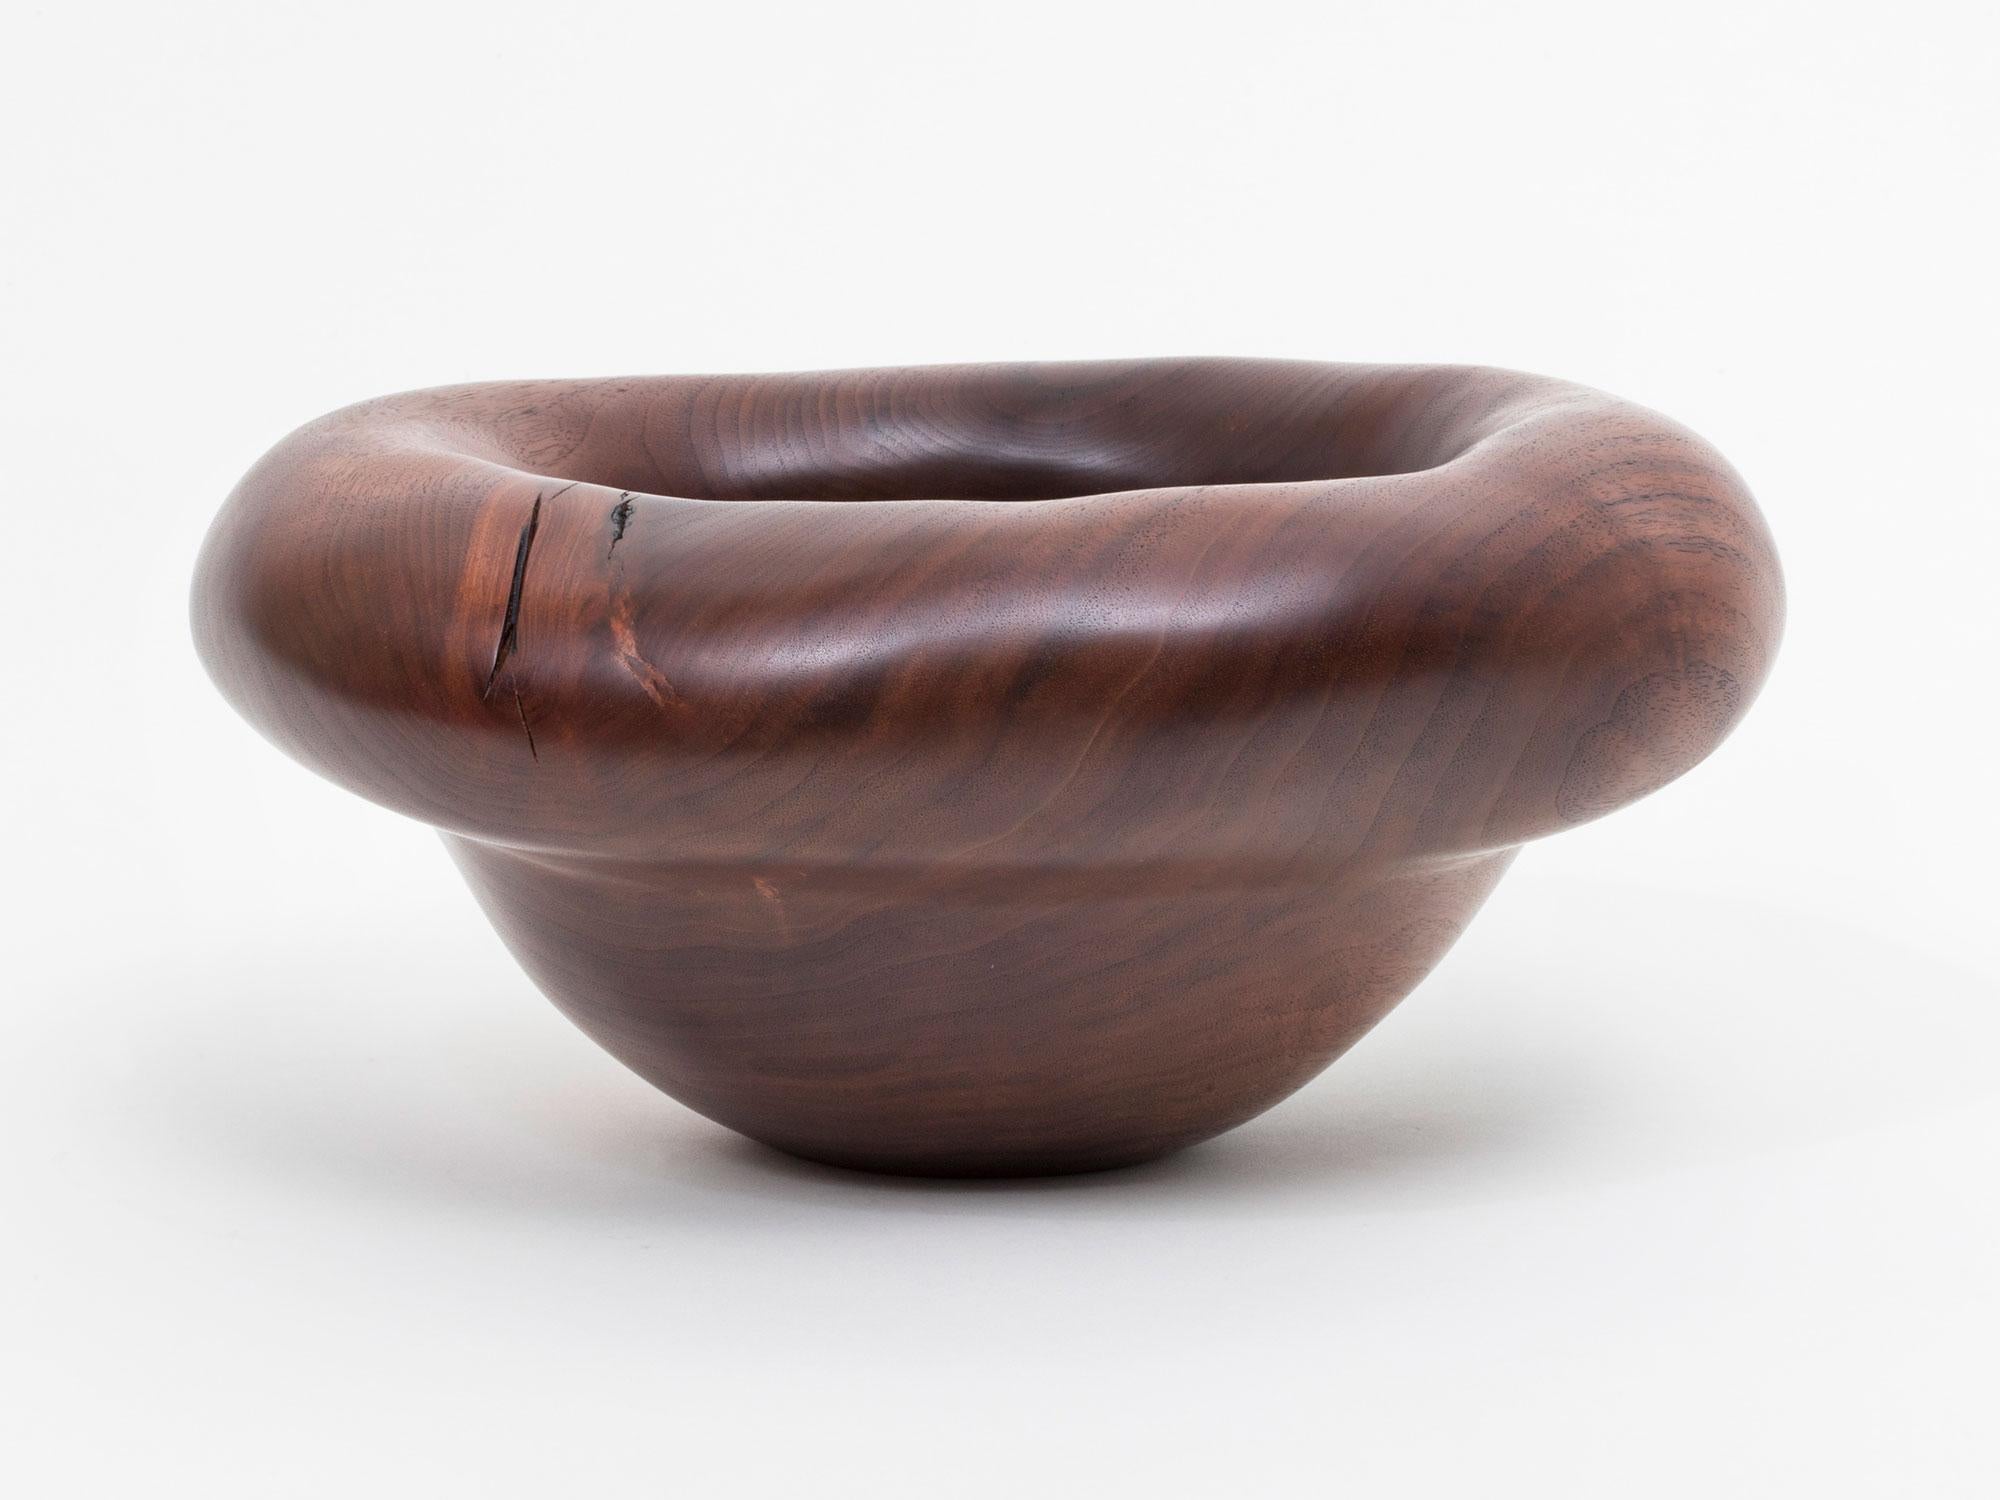 Hand carved walnut bowl sculpture by Oregon based artist Julian Watts.

Julian Watts was born and raised in San Francisco, and now lives and works in Alpine, OR. He has shown work internationally at the FOG Fair, Design Miami, The London Design